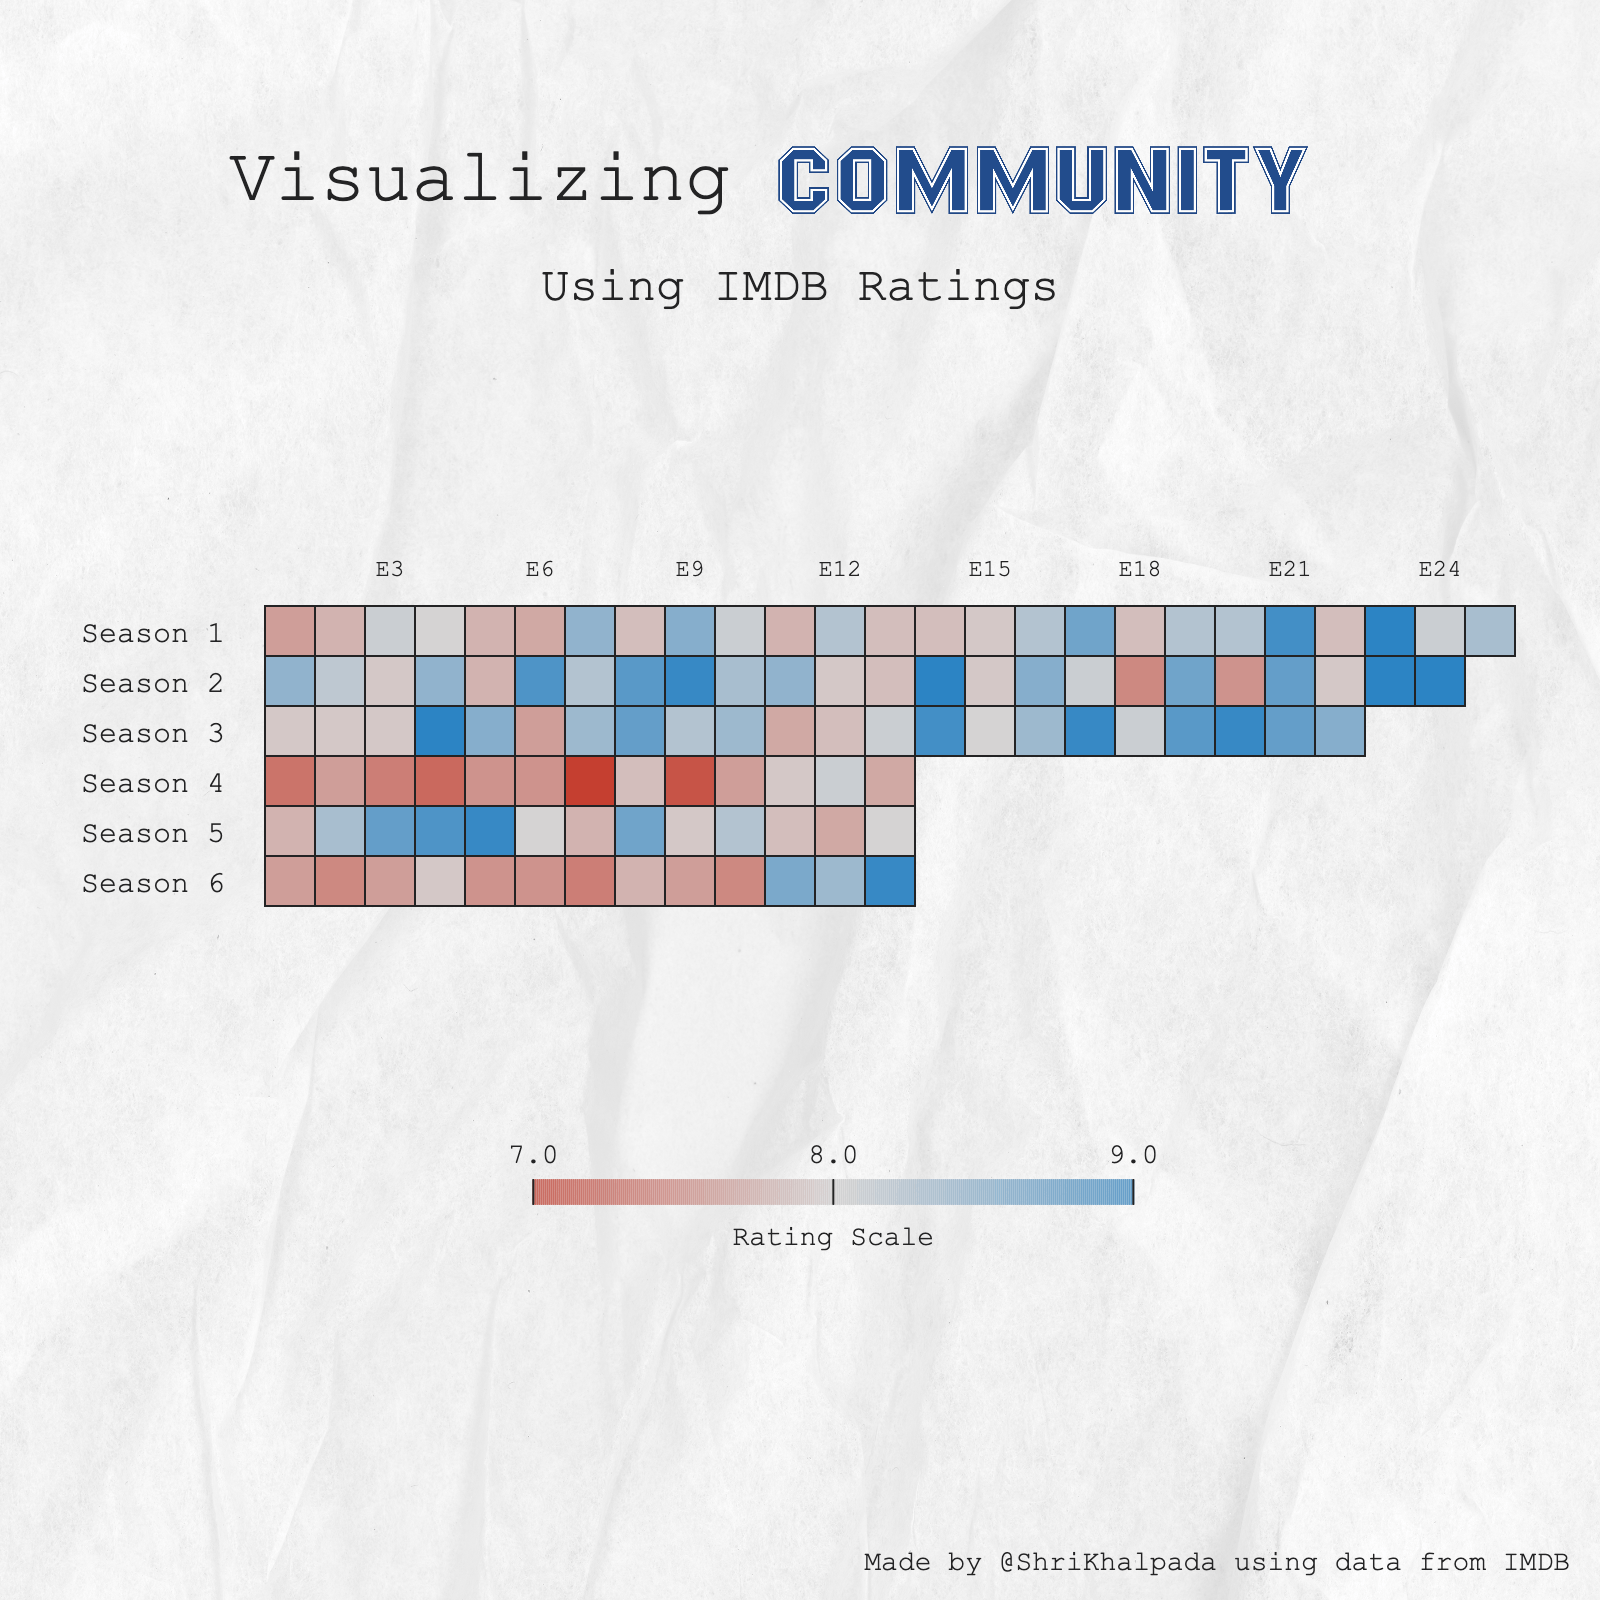 A heat map titled "Visualizing COMMUNITY Using IMDB Ratings" displaying a color-coded grid for each episode of six seasons, with colors representing the rating scale from 7.0 to 9.0.